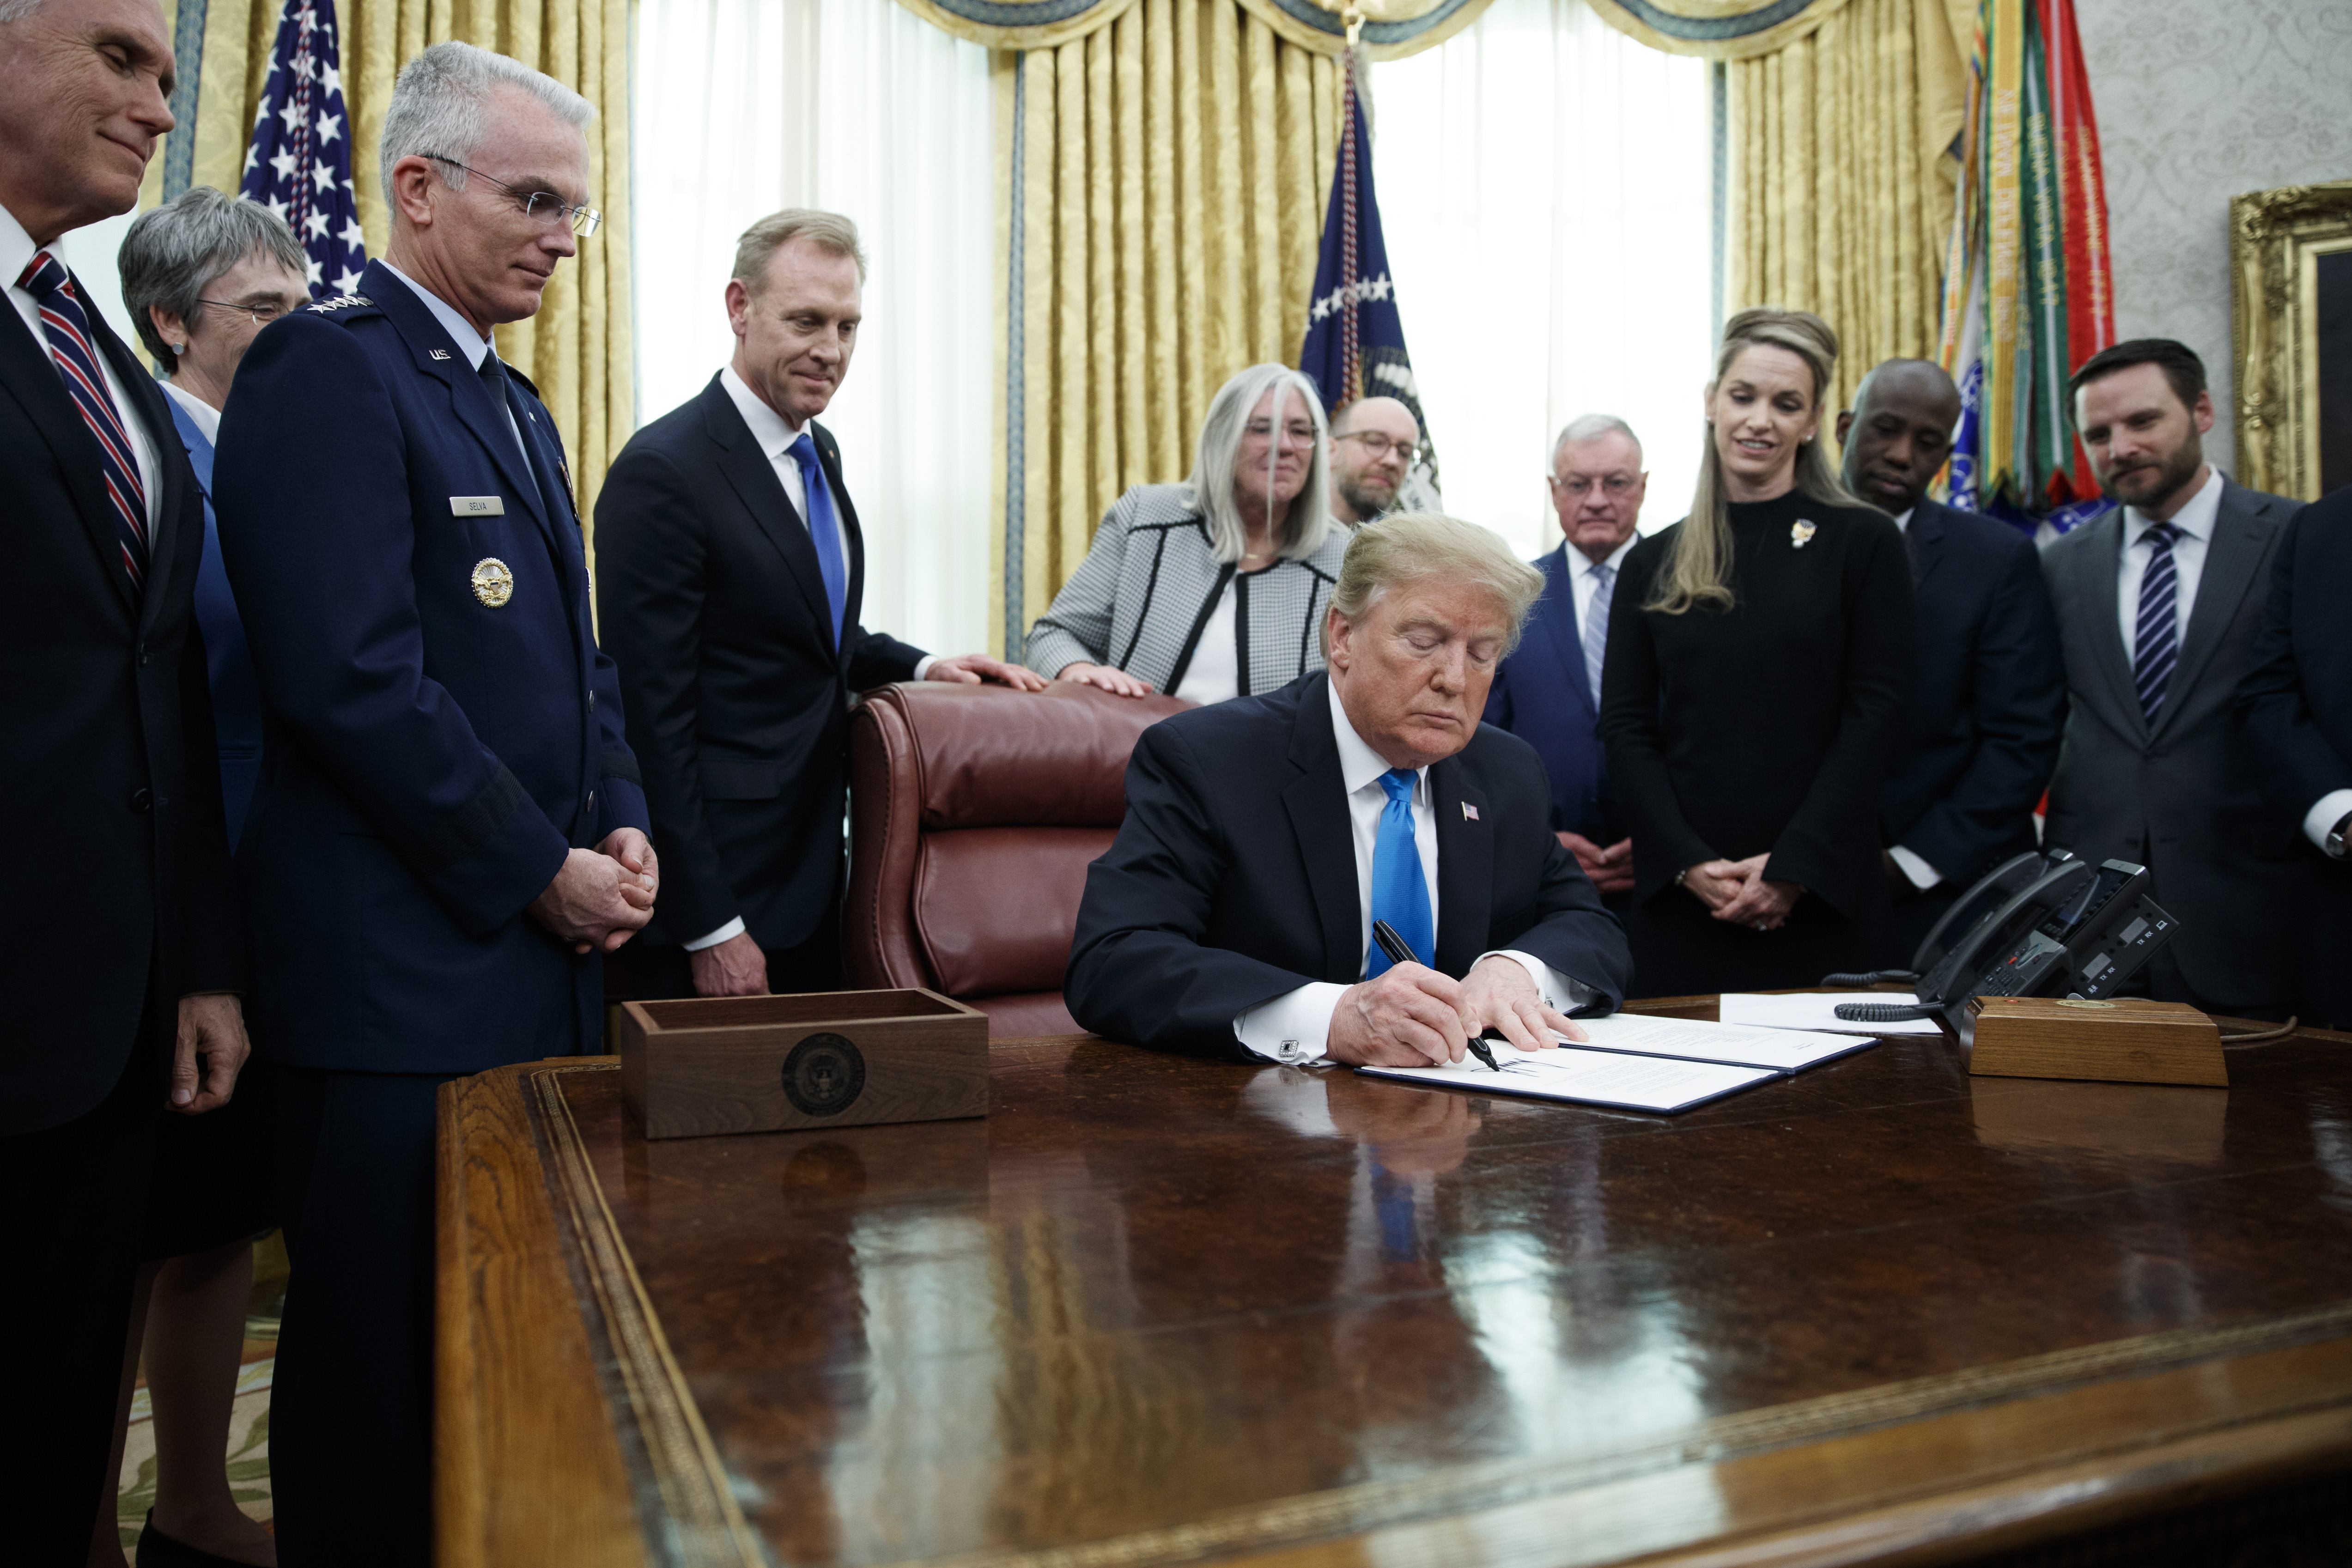 epa07381620 US President Donald J. Trump (C) participates in a signing ceremony for Space Policy Directive 4 in the Oval Office of the White House in Washington, DC, USA, 19 February 2019. The policy directive establishes the Space Force as the 6th branch of US armed forces operating within the department of the Air Force.  EPA/SHAWN THEW